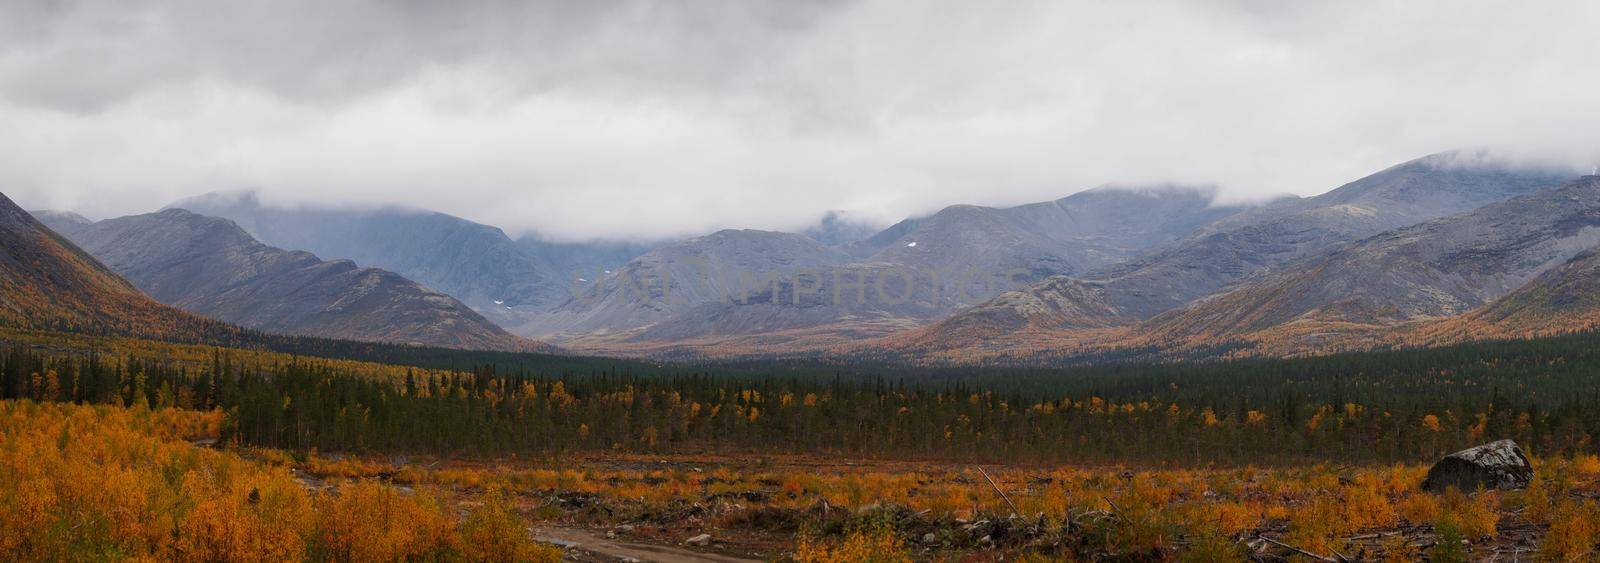 Autumn colorful tundra on the background mountain peaks in cloudy weather. Mountain landscape in Kola Peninsula, Arctic, Khibiny Mountains. by Andre1ns